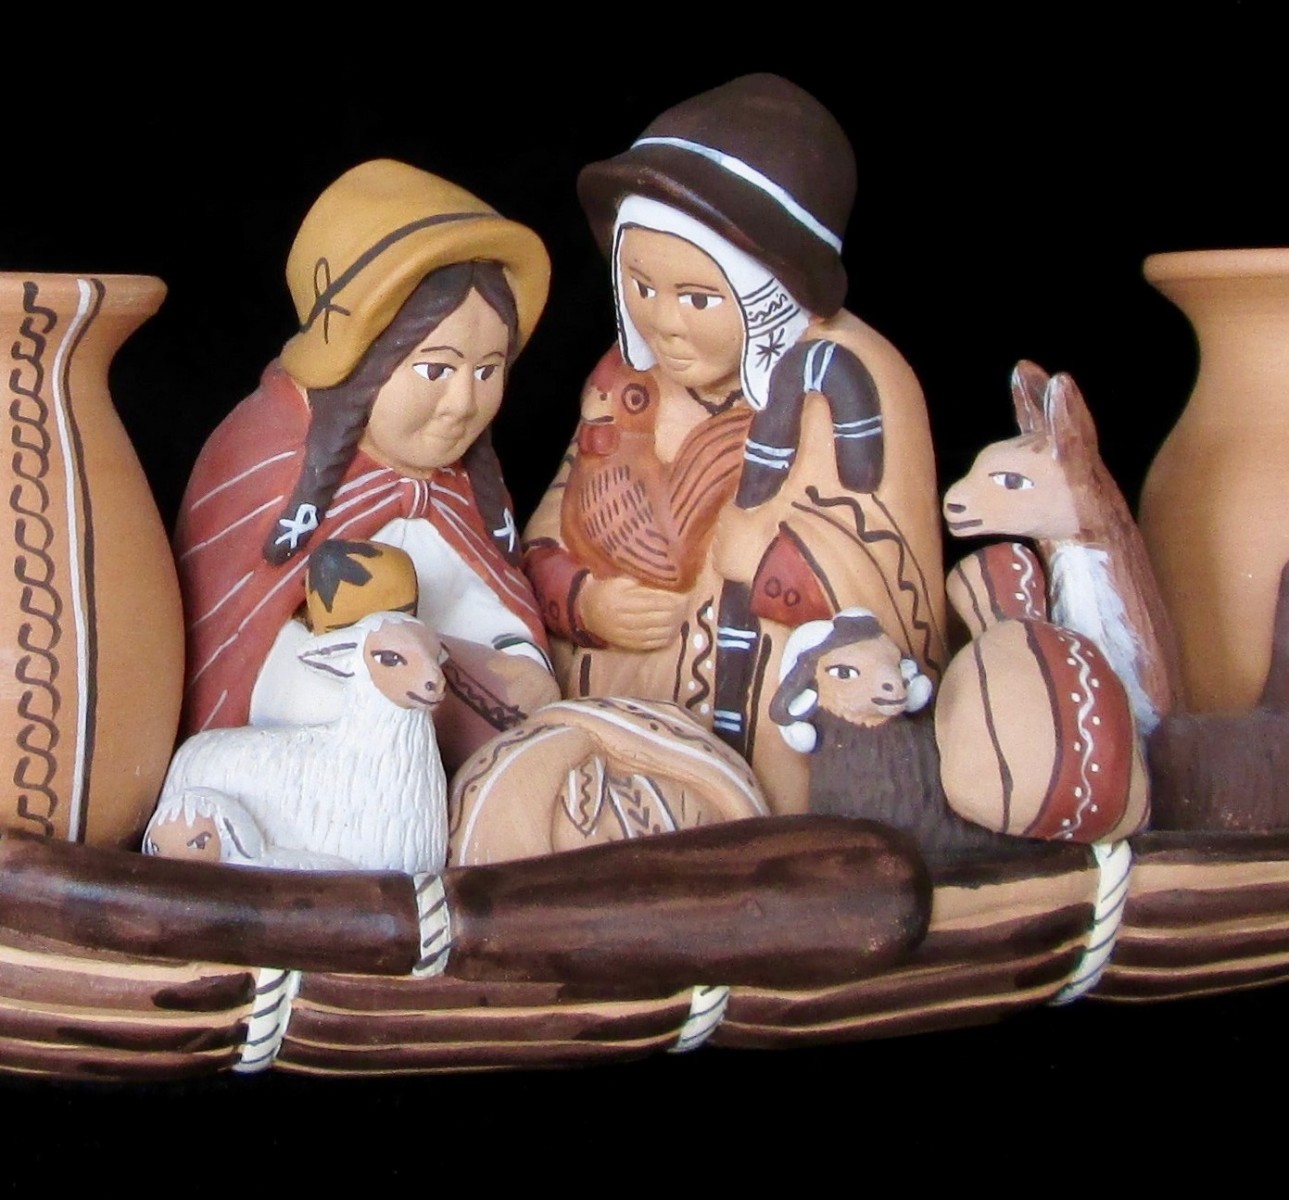 Artist unknown. Peruvian Canoe nacimiento (nativity scene). Painted clay. Collection, Taylor-Mesilla Historic Property.